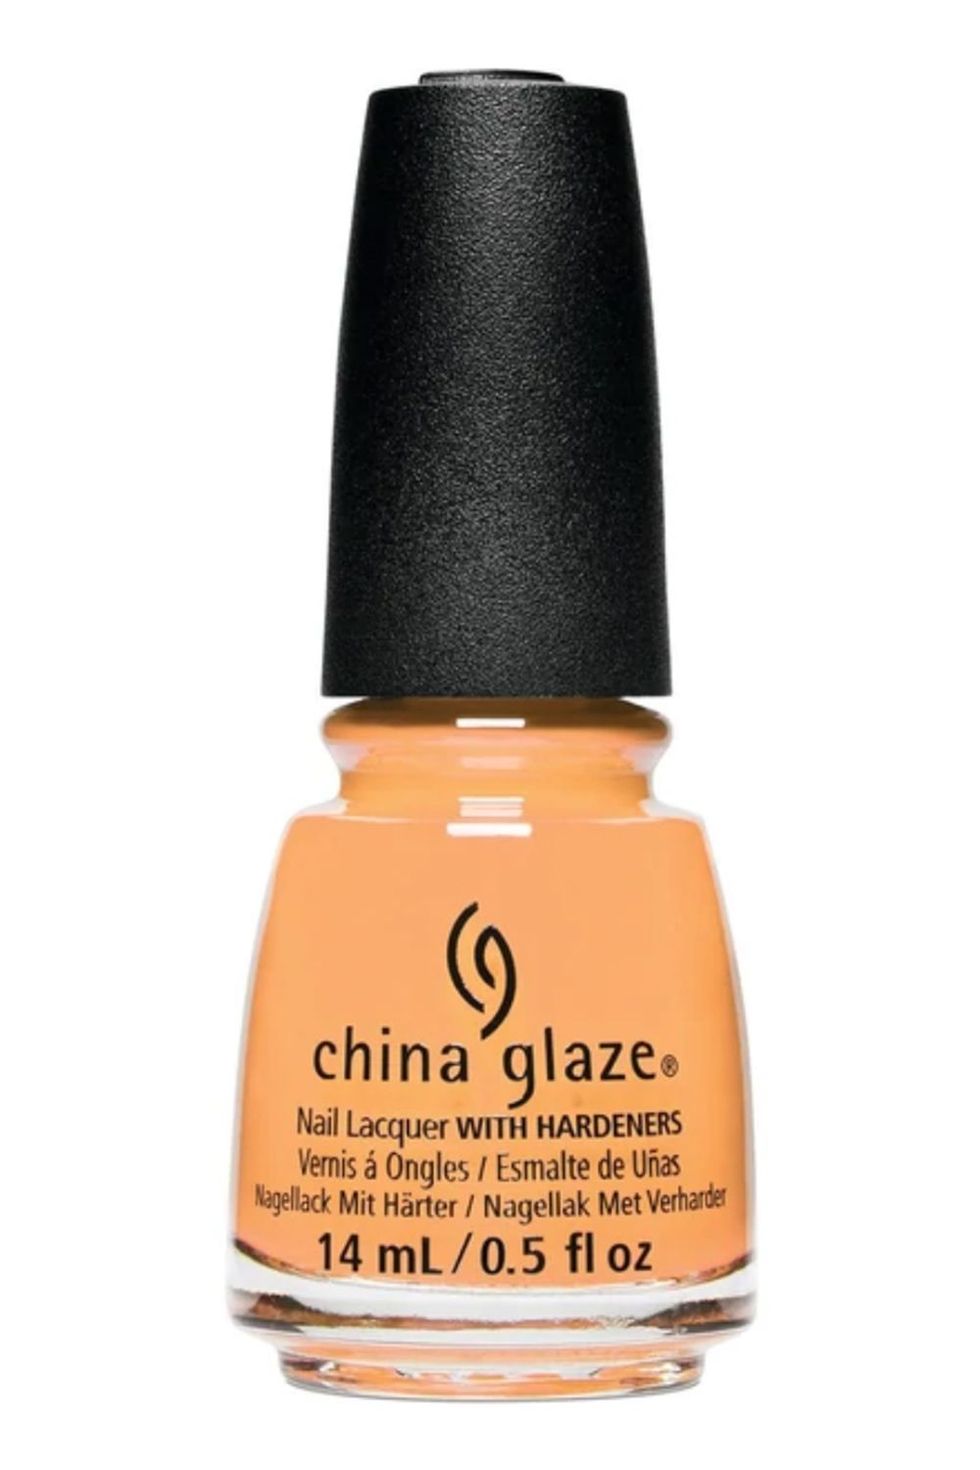 China Glaze Nail Lacquer with Hardeners in Tangerine Heat